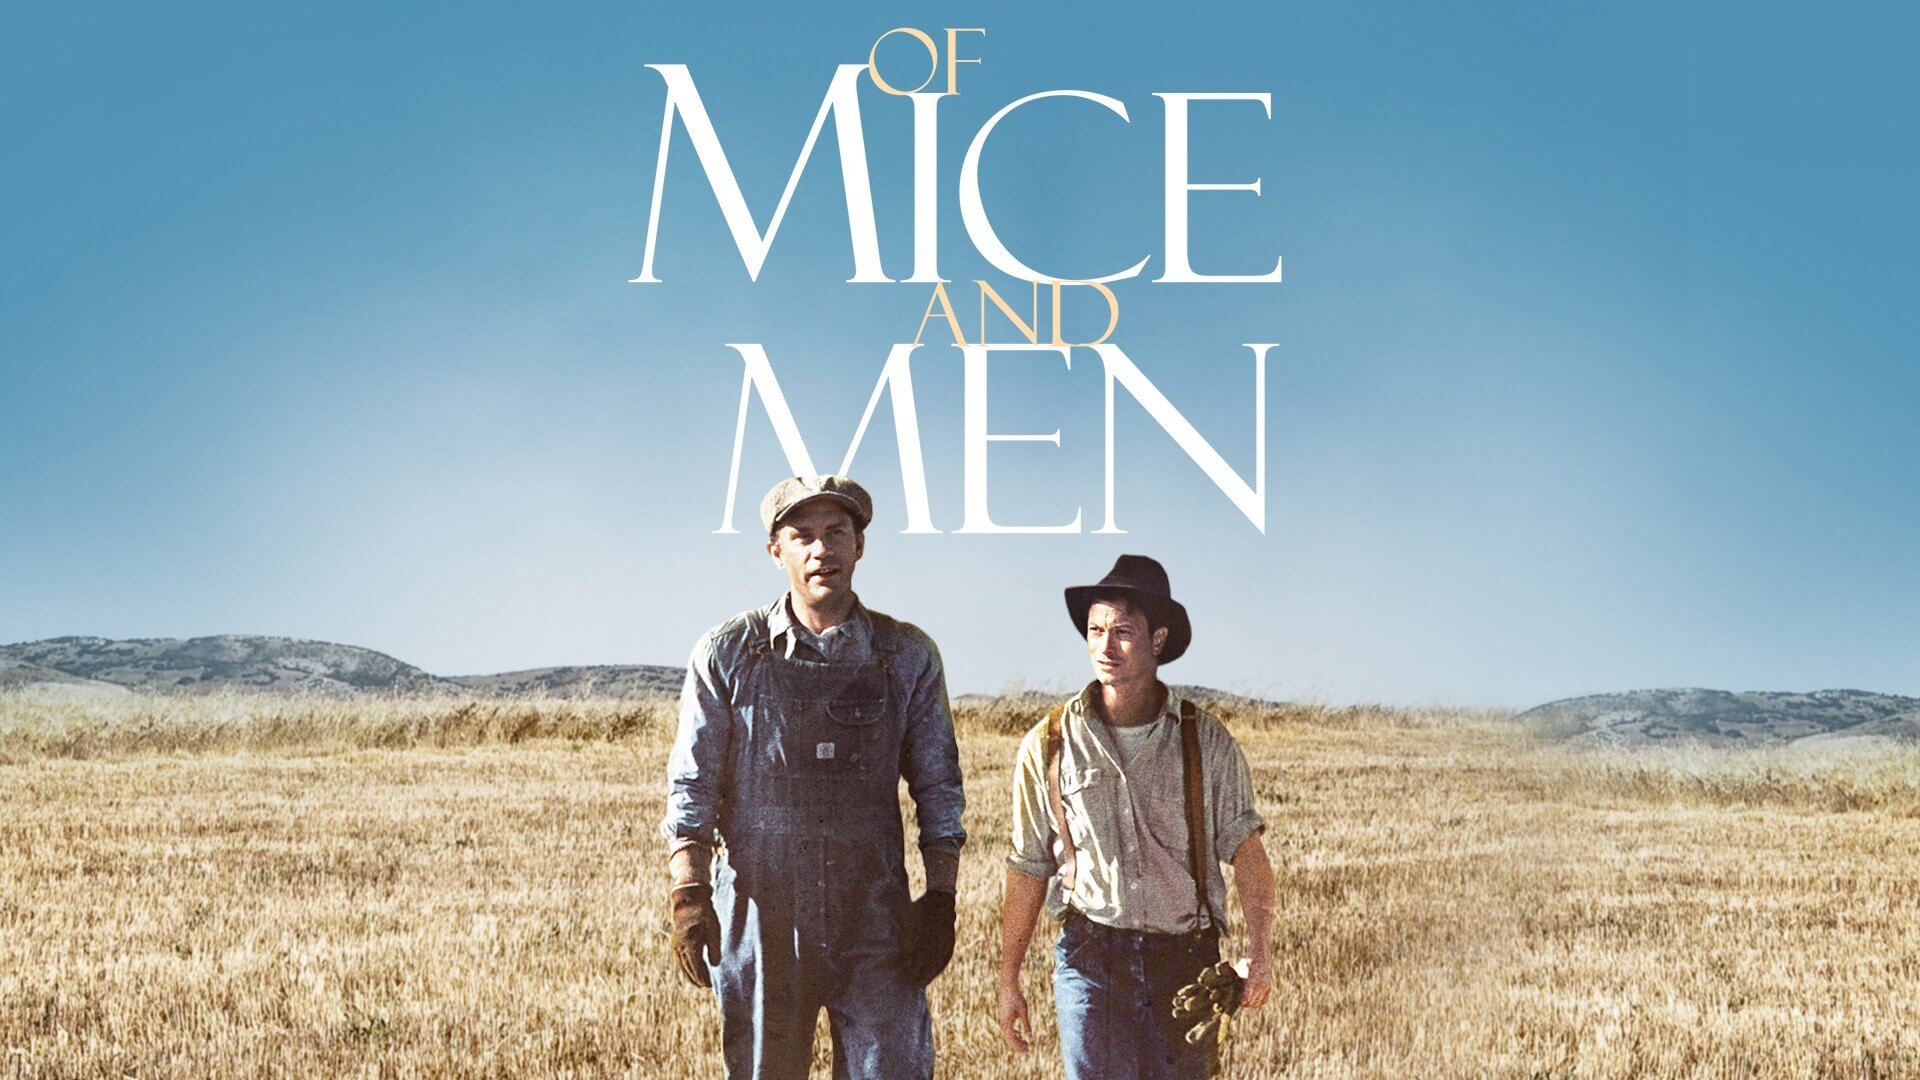 48-facts-about-the-movie-of-mice-and-men